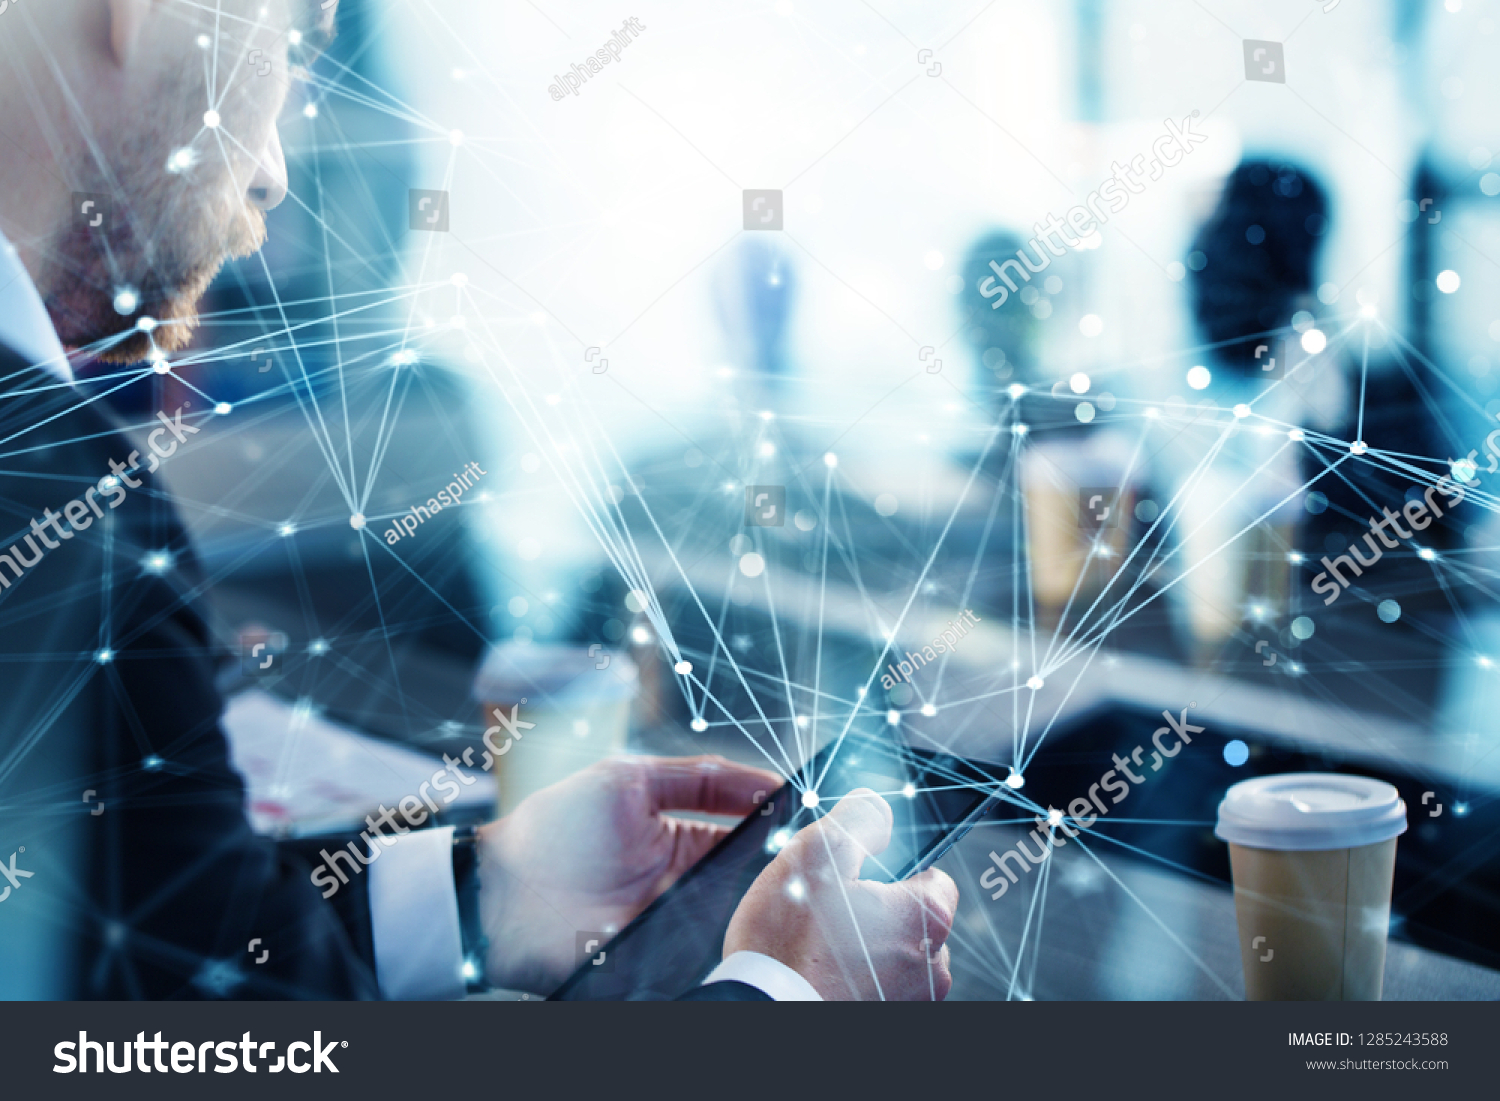 Business man works in office with tablet in the foreground. Concept of teamwork and partnership. double exposure with network effects #1285243588